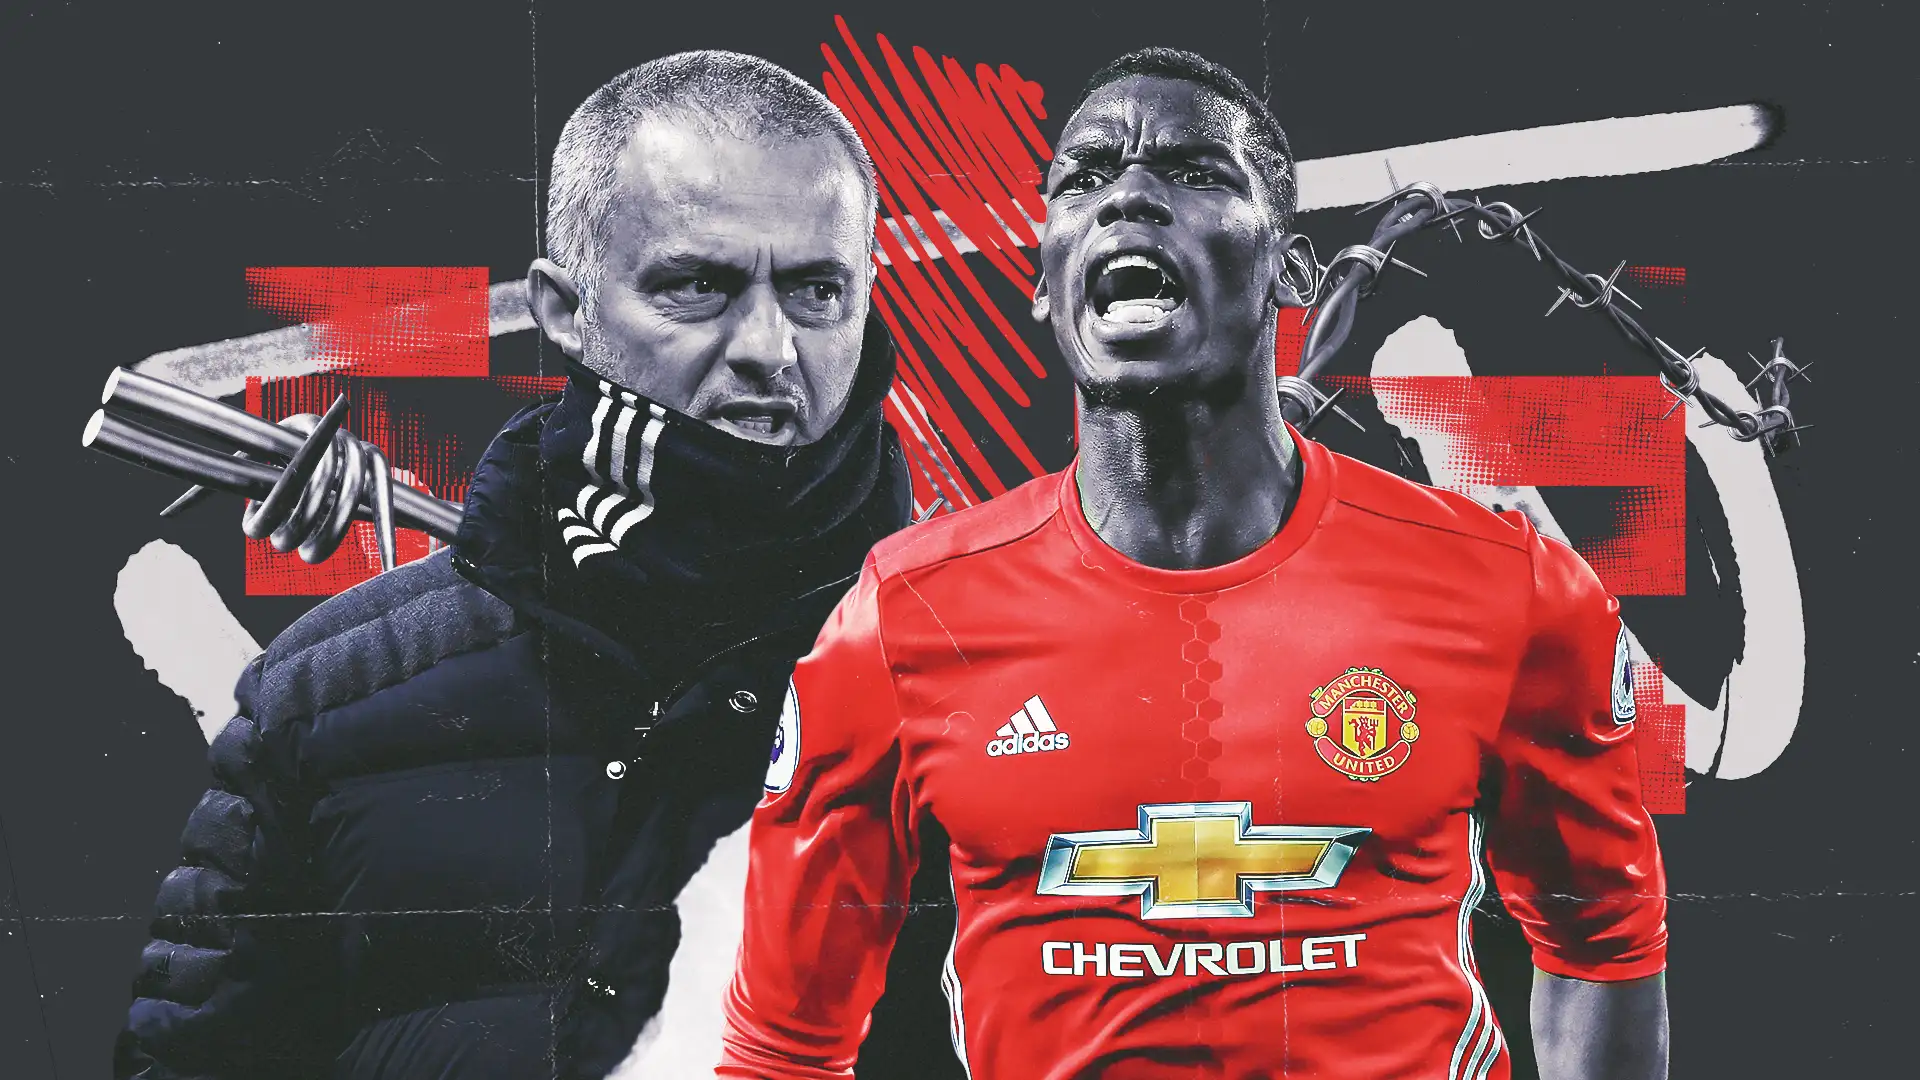 Football’s biggest bust-ups: How Jose Mourinho and Paul Pogba went from allies to enemies at Man Utd